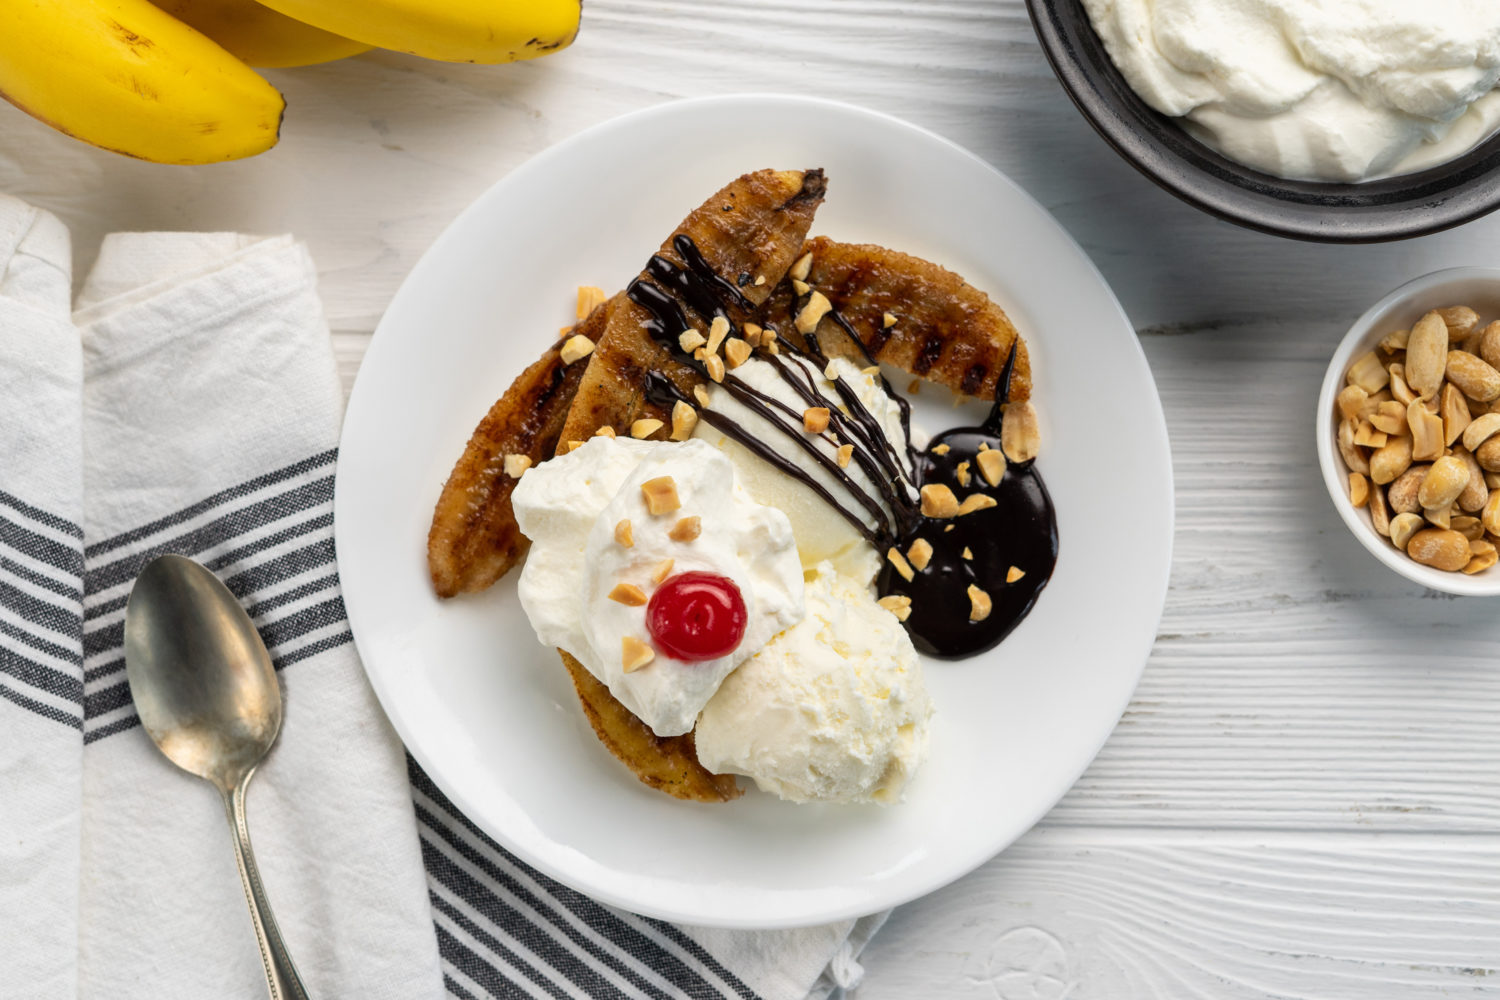 grilled bananas with ice cream, chocolate syrup and whipped cream